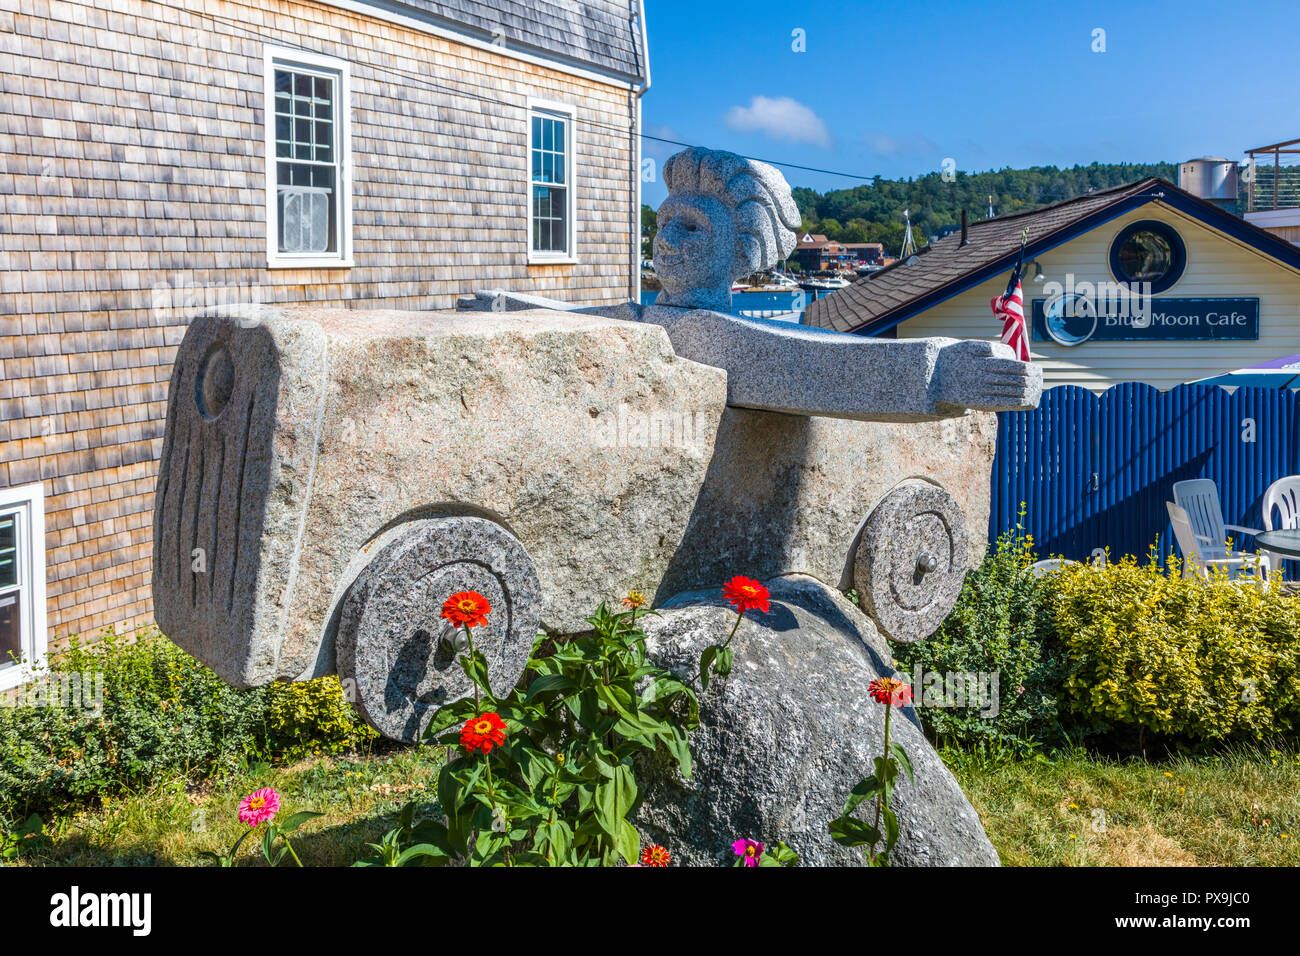 Downtown business center of Boothbay Harbor Maine in the United States  Stock Photo - Alamy